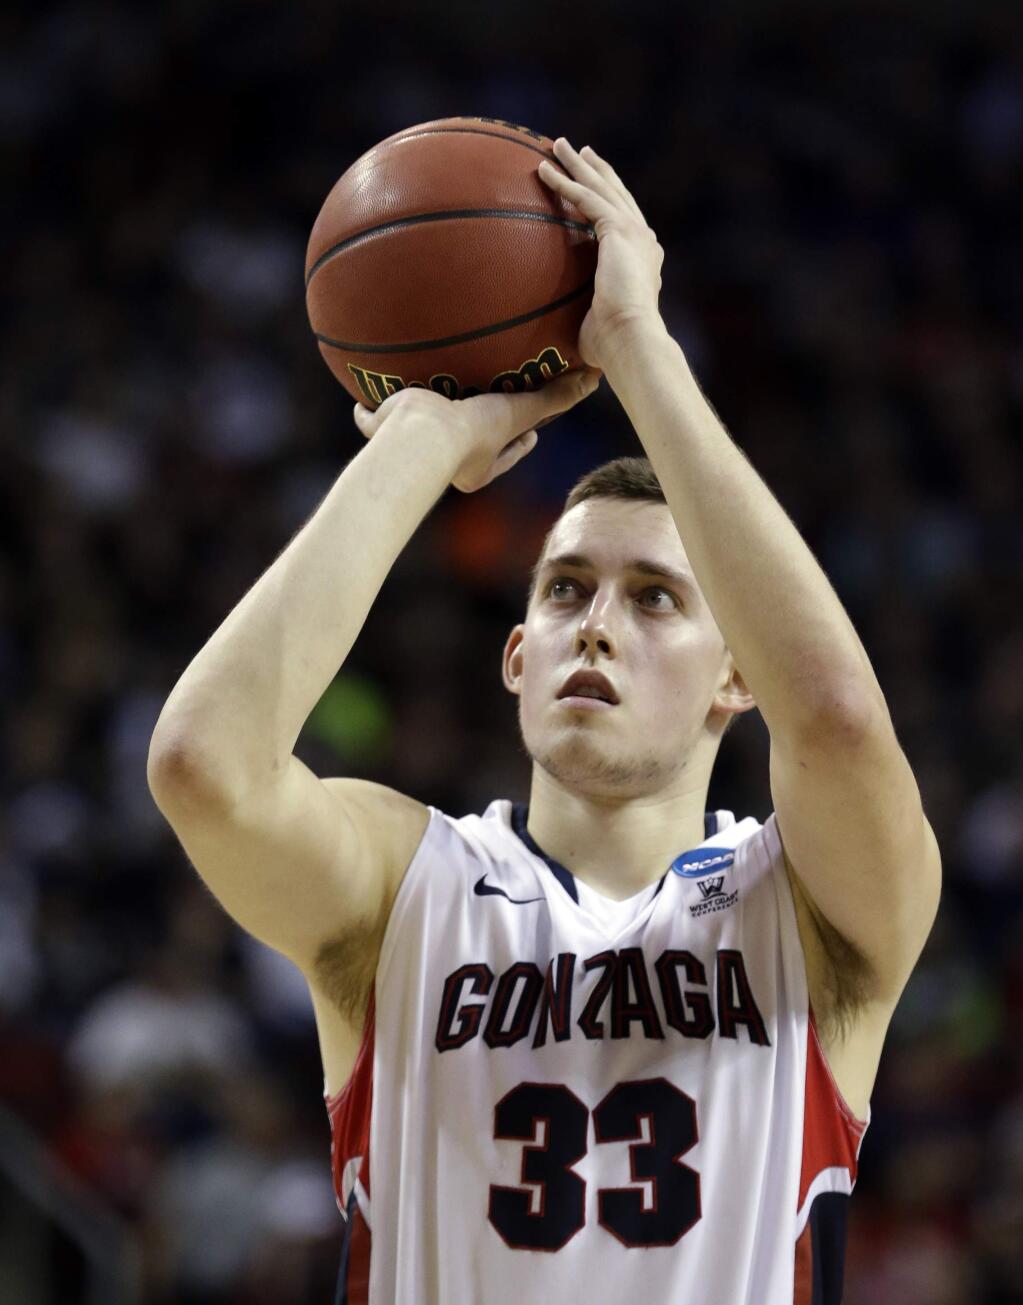 Gonzaga's Kyle Wiltjer shoots a free throw against North Dakota State during the second half of an NCAA tournament college basketball game in the Round of 64 in Seattle, Friday, March 20, 2015. Wiltjer led all scorers with 33 points and Gonzaga won 86-76. (AP Photo/Elaine Thompson)